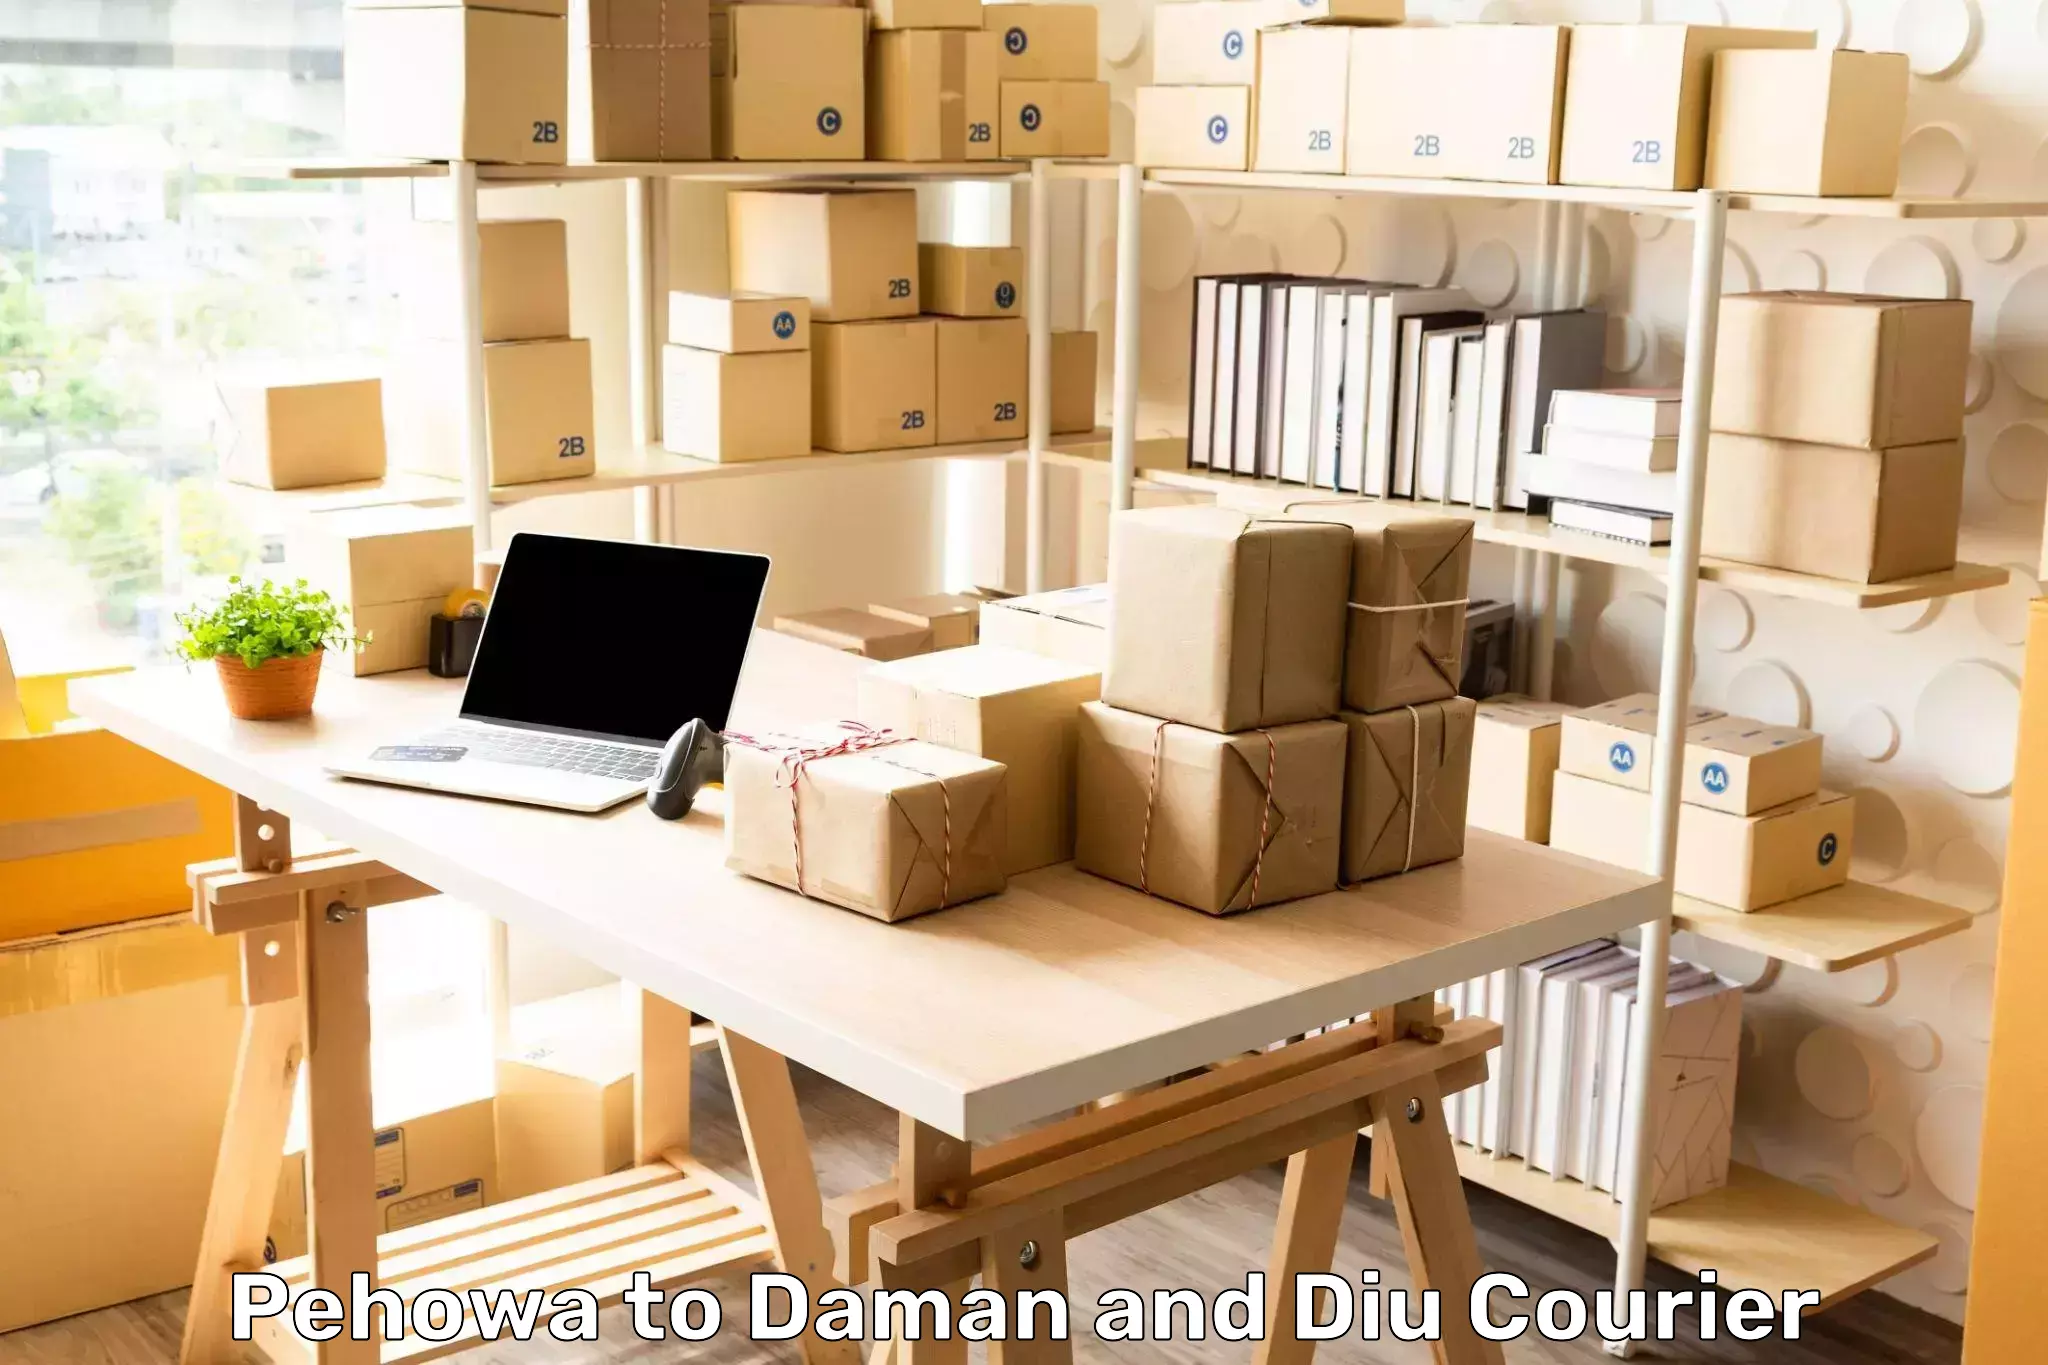 Full-service courier options Pehowa to Daman